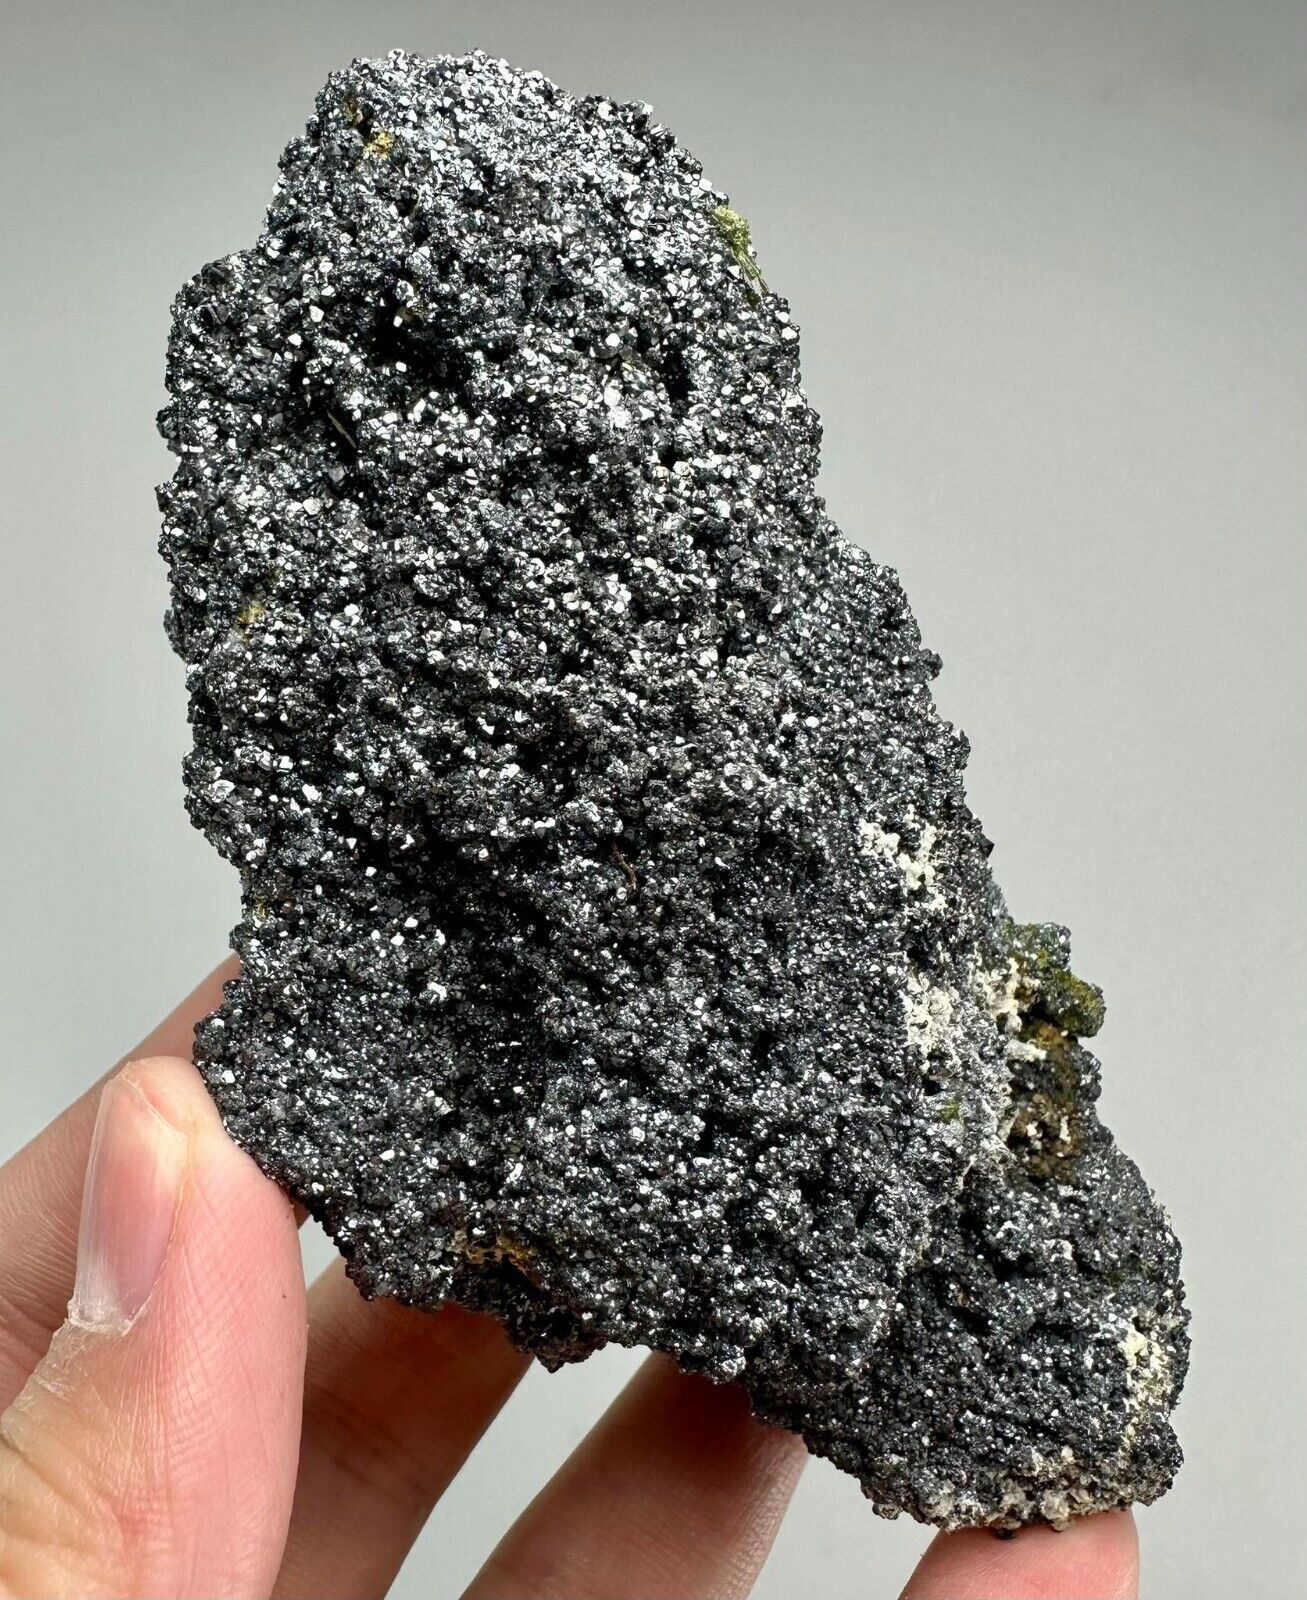 454 Gr. Full Terminated Extremely Rare Magnetite Crystals Cluster On Matrix